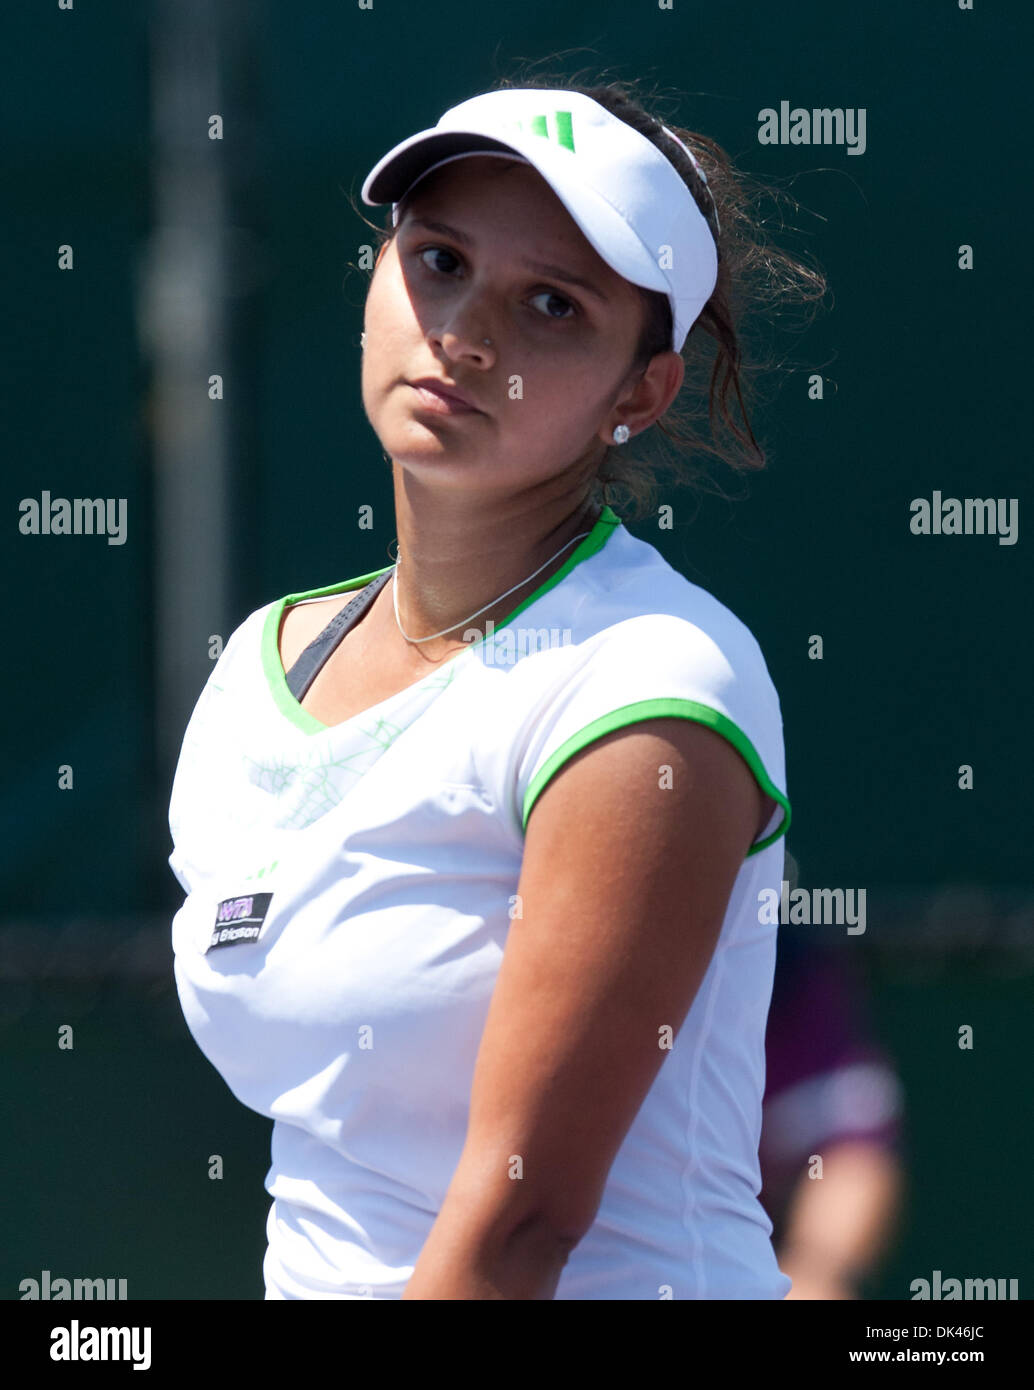 Mar. 25, 2011 - International Tennis - 2011 ATP World Tour - Masters 1000 - Sony Ericcson Open - Fri 25 Mar 2011 - Crandon Park Tennis Center - Key Biscayne - Miami - Florida - USA.Sania Mirza (IND) has a look of dissapointment after almost pulling of the win over Maria Kirilinko (RUS). 75, 36, 06. Credit Andrew Patron/ BigShots Photography (Credit Image: © Andrew Patron/ZUMAPRESS. Stock Photo